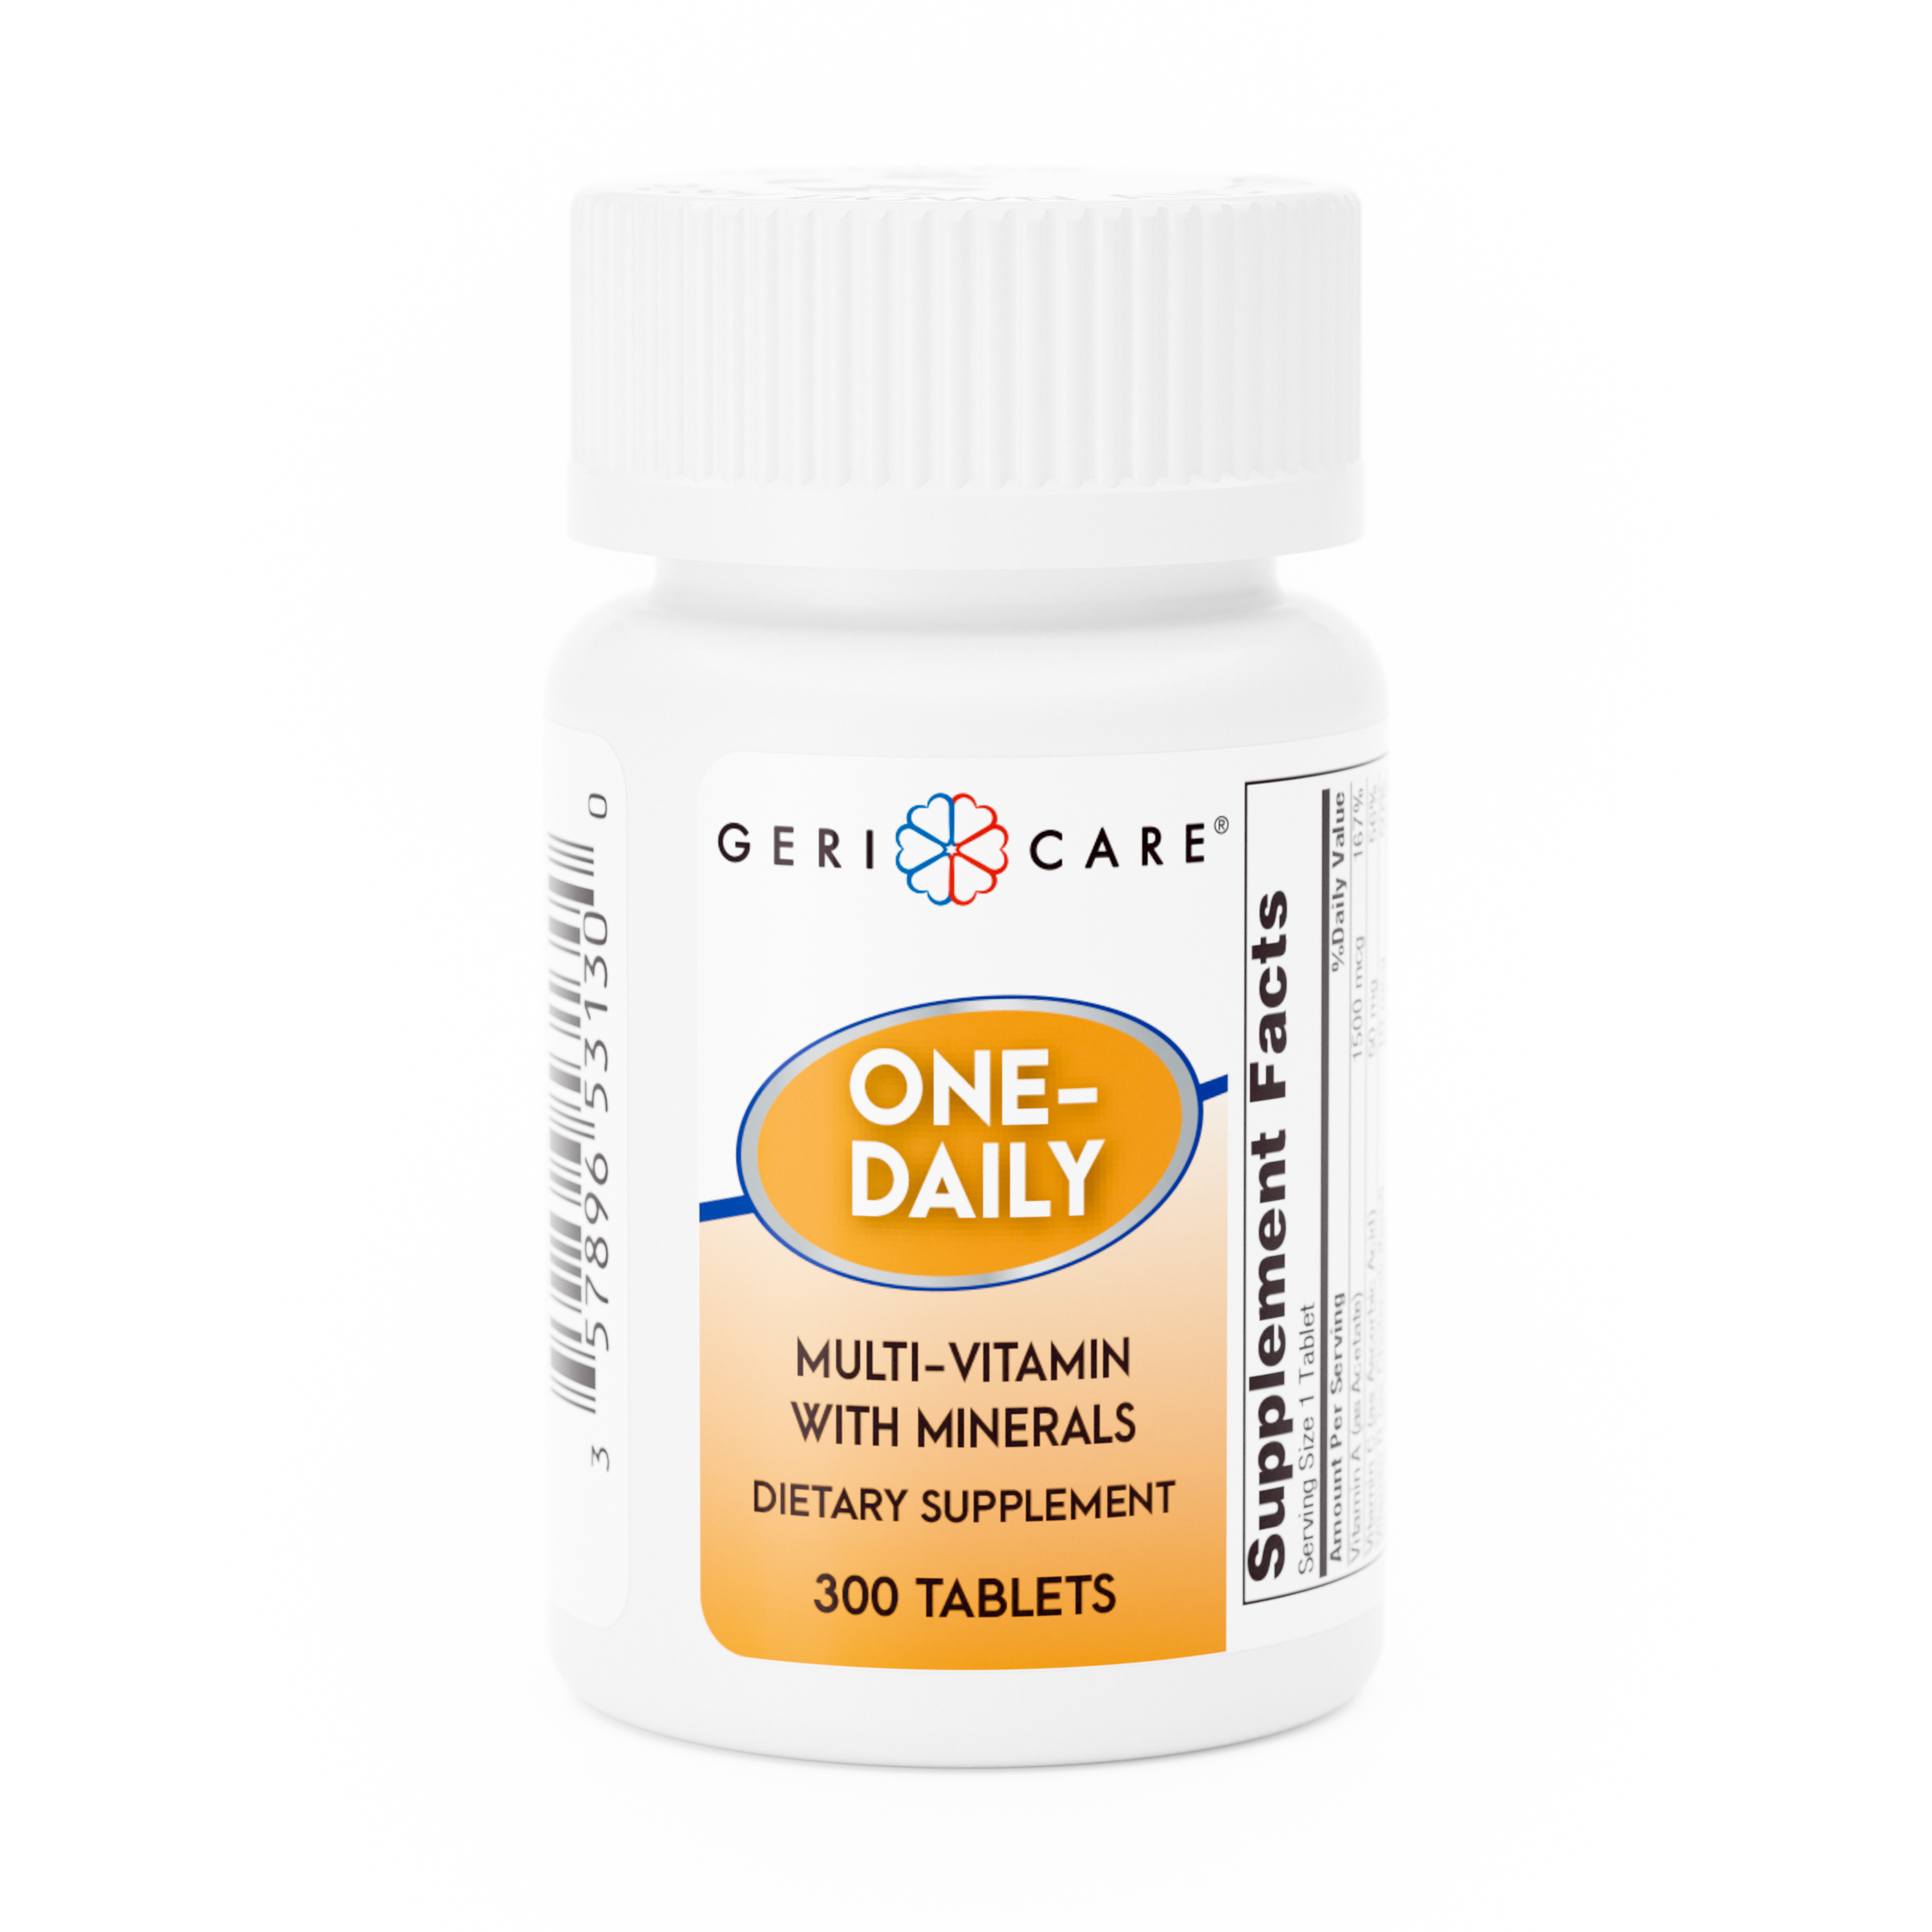 One-Daily Multi-Vitamin + Minerals – 300 Tablets